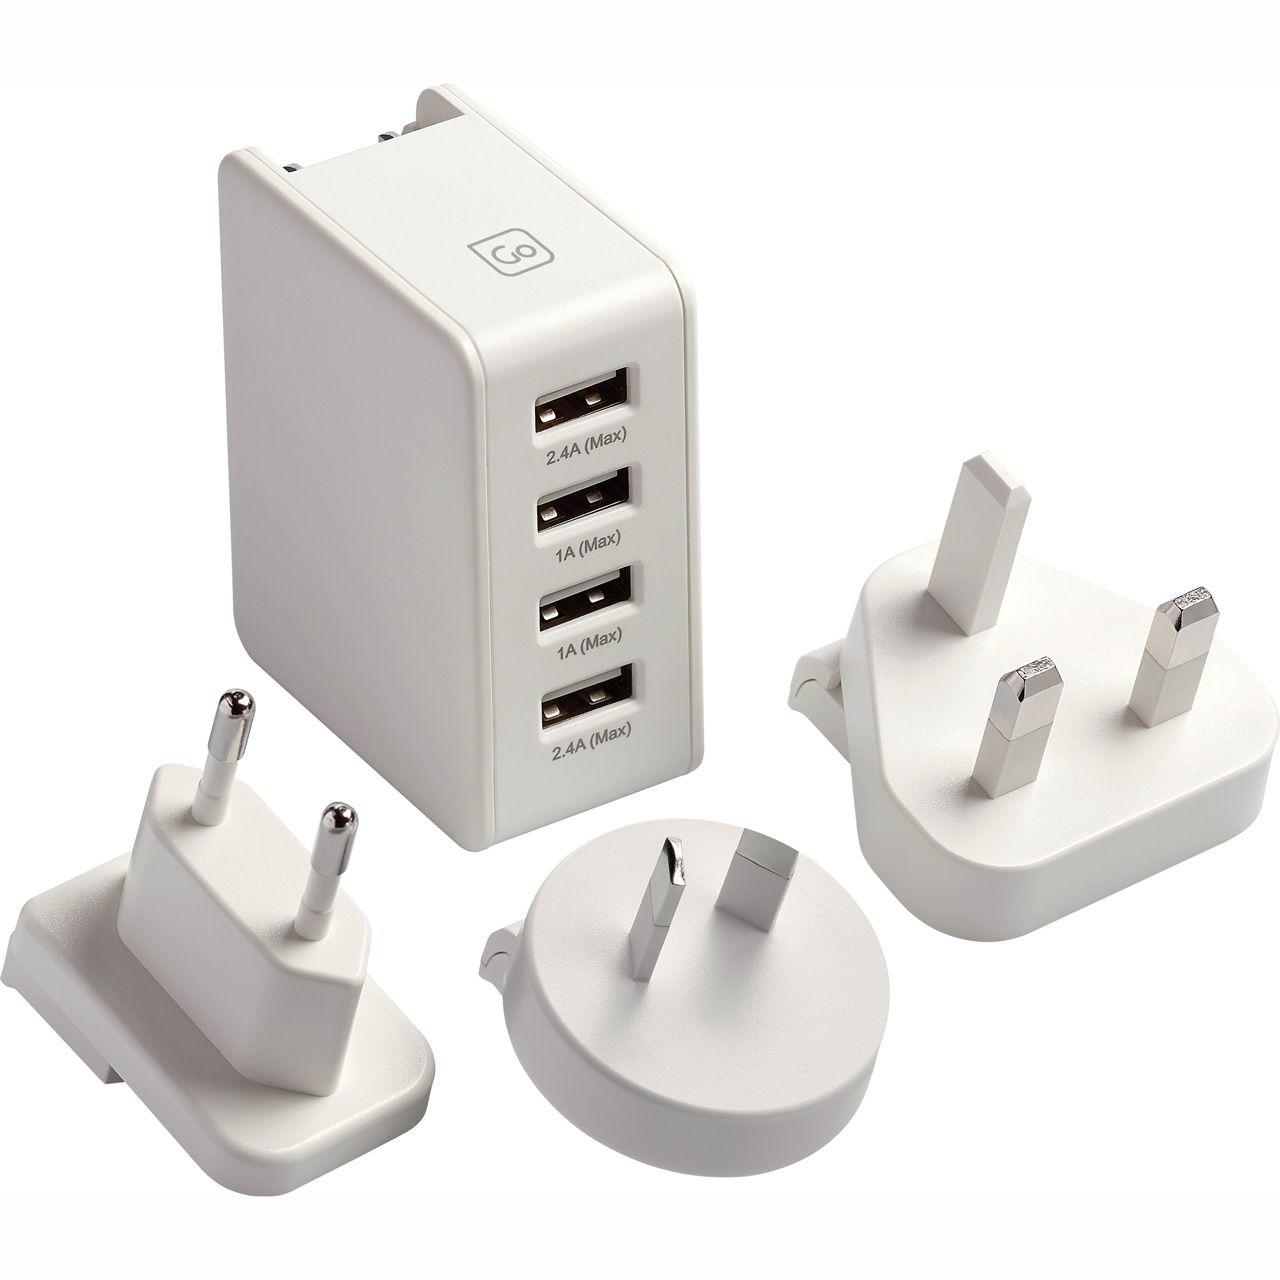 USB Charger For Worldwide Use